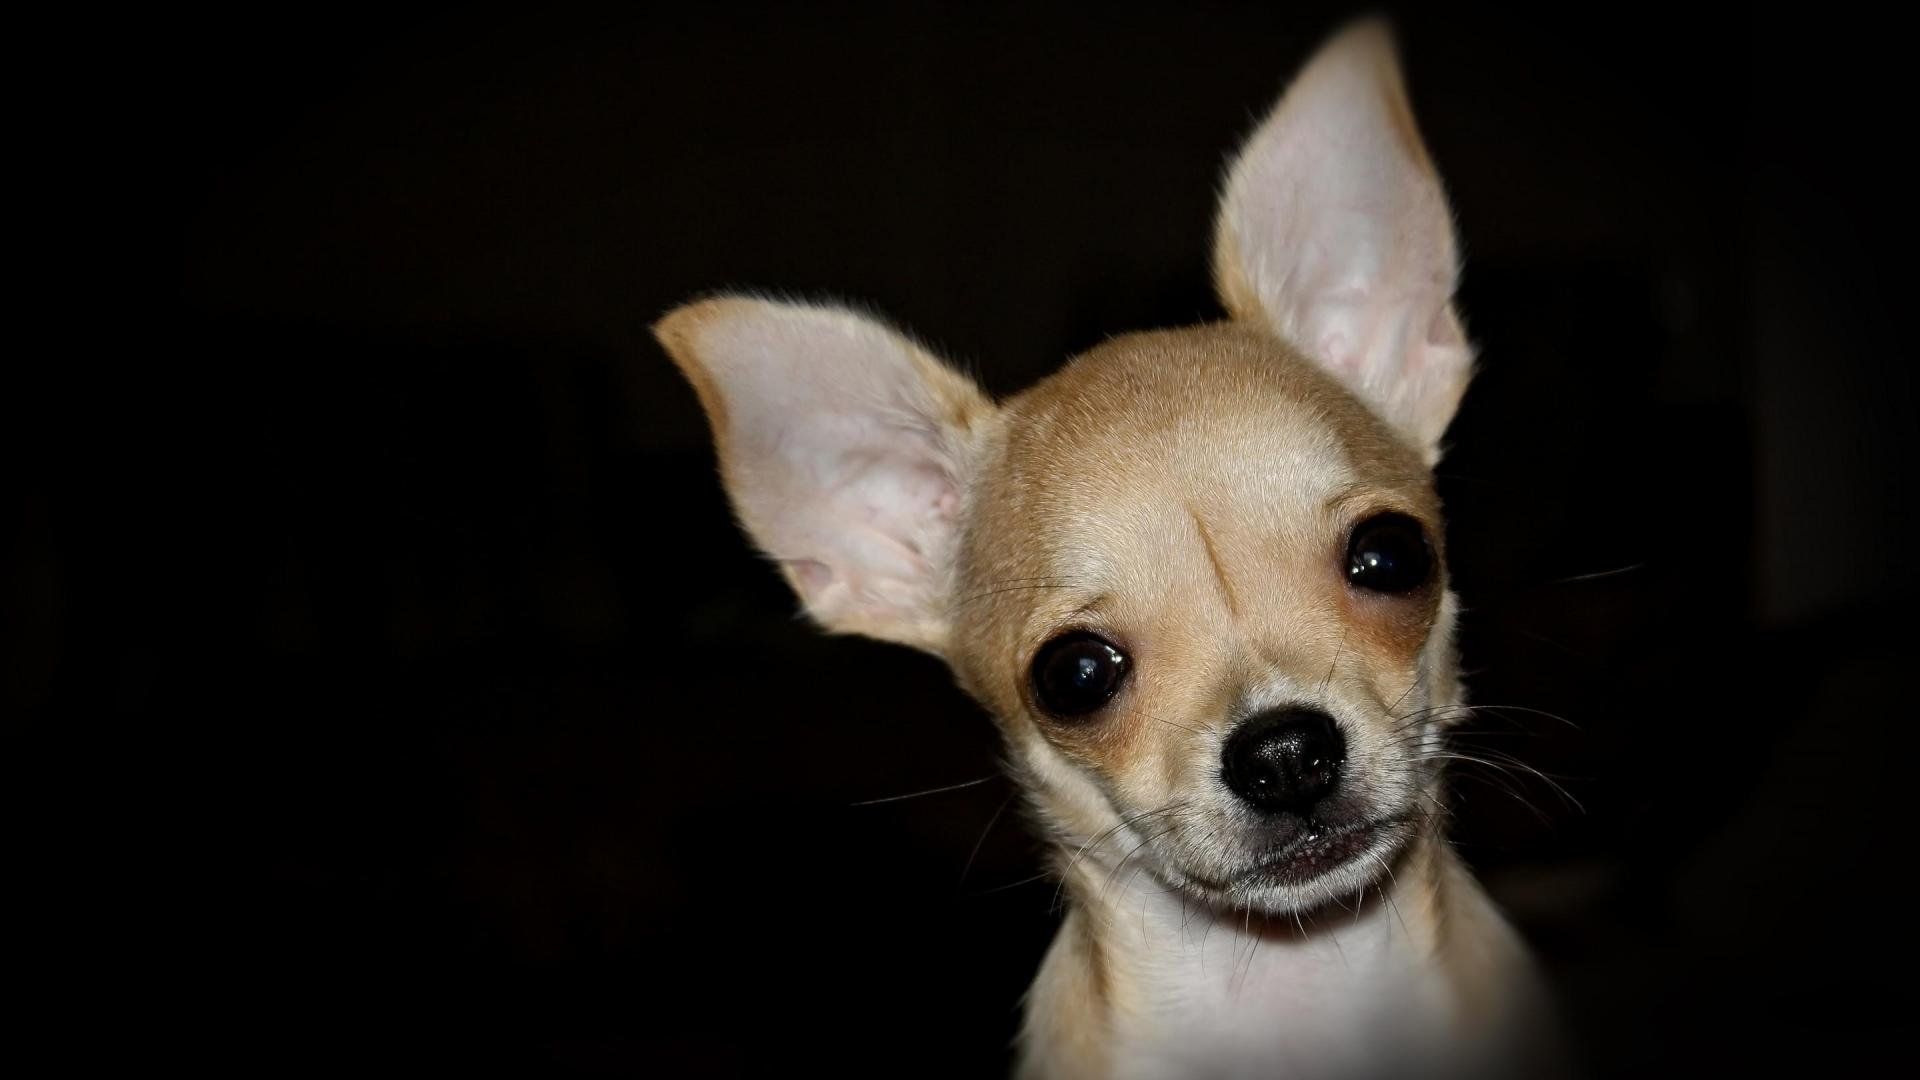 The Wallpapers Dogs Chihuahua